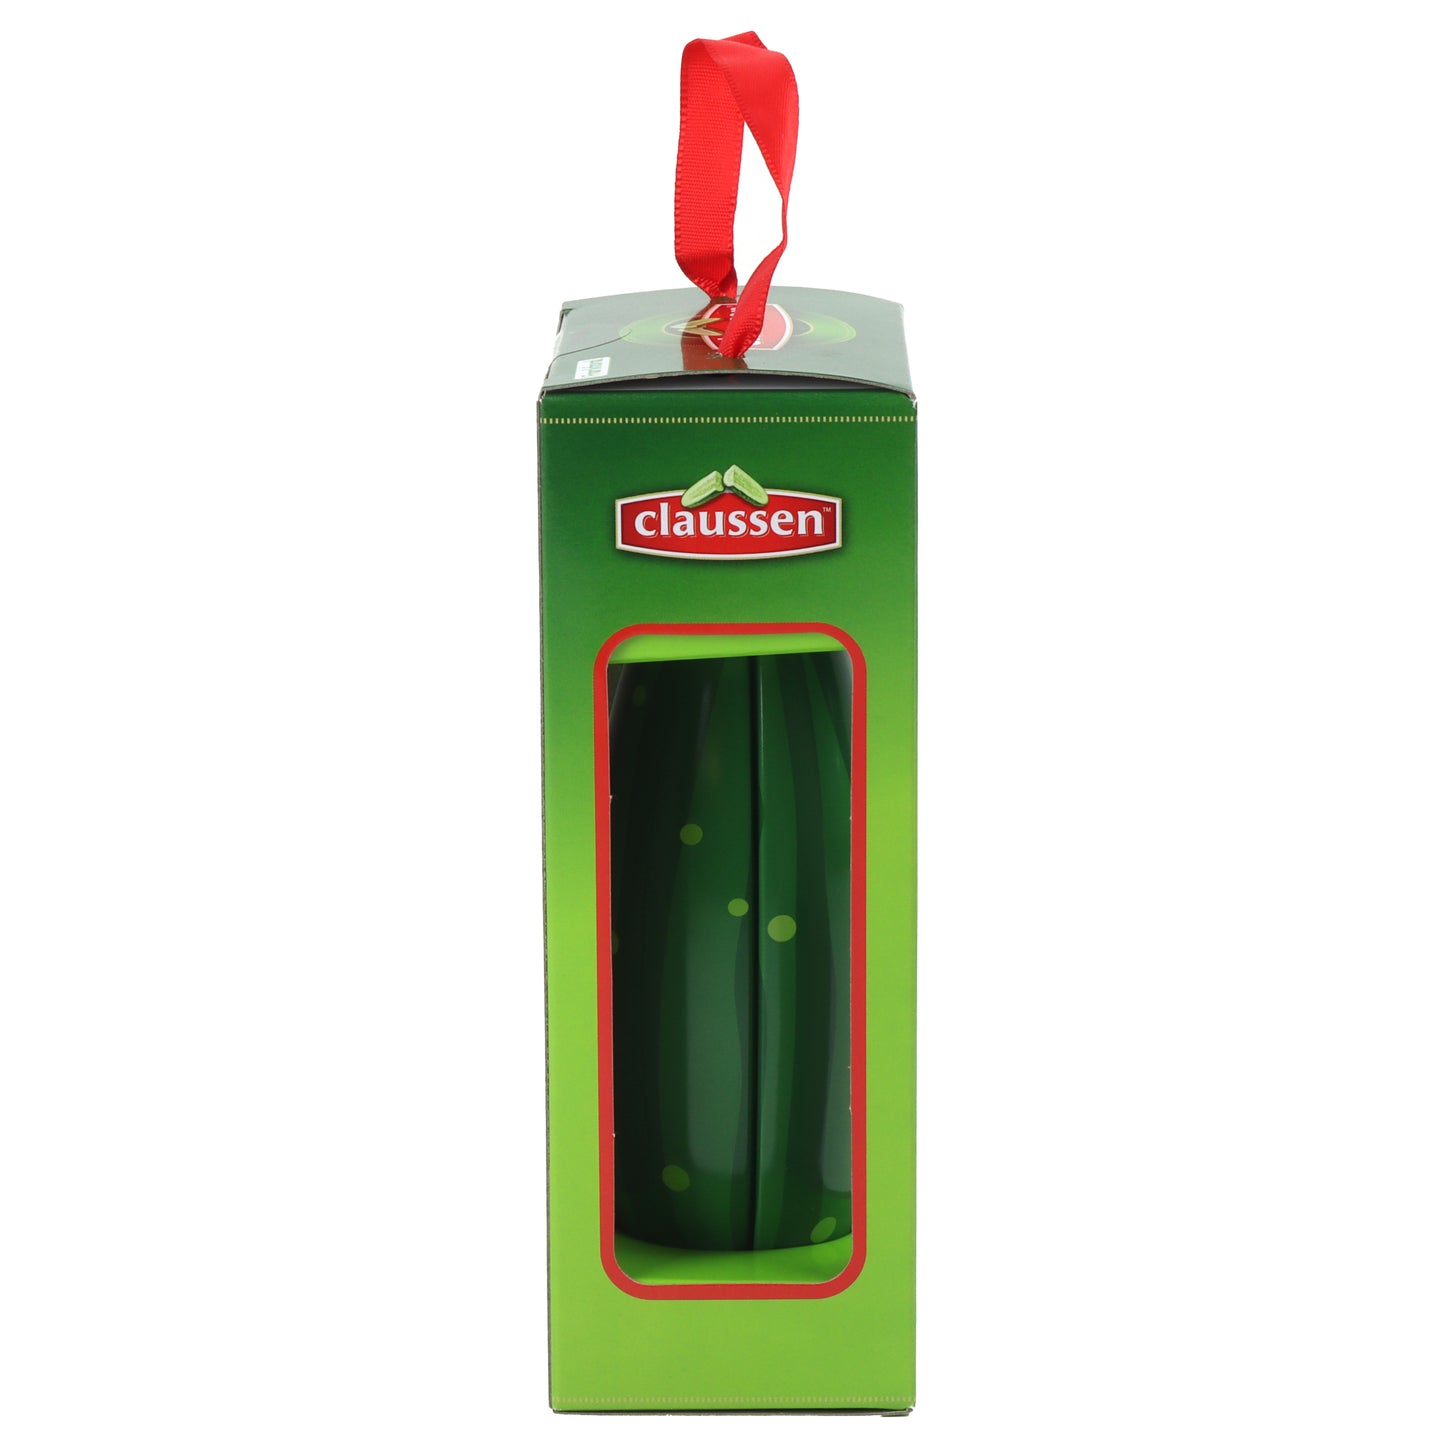 Claussen Pickle Tin Ornament with Gummy Candy, 2 Pack